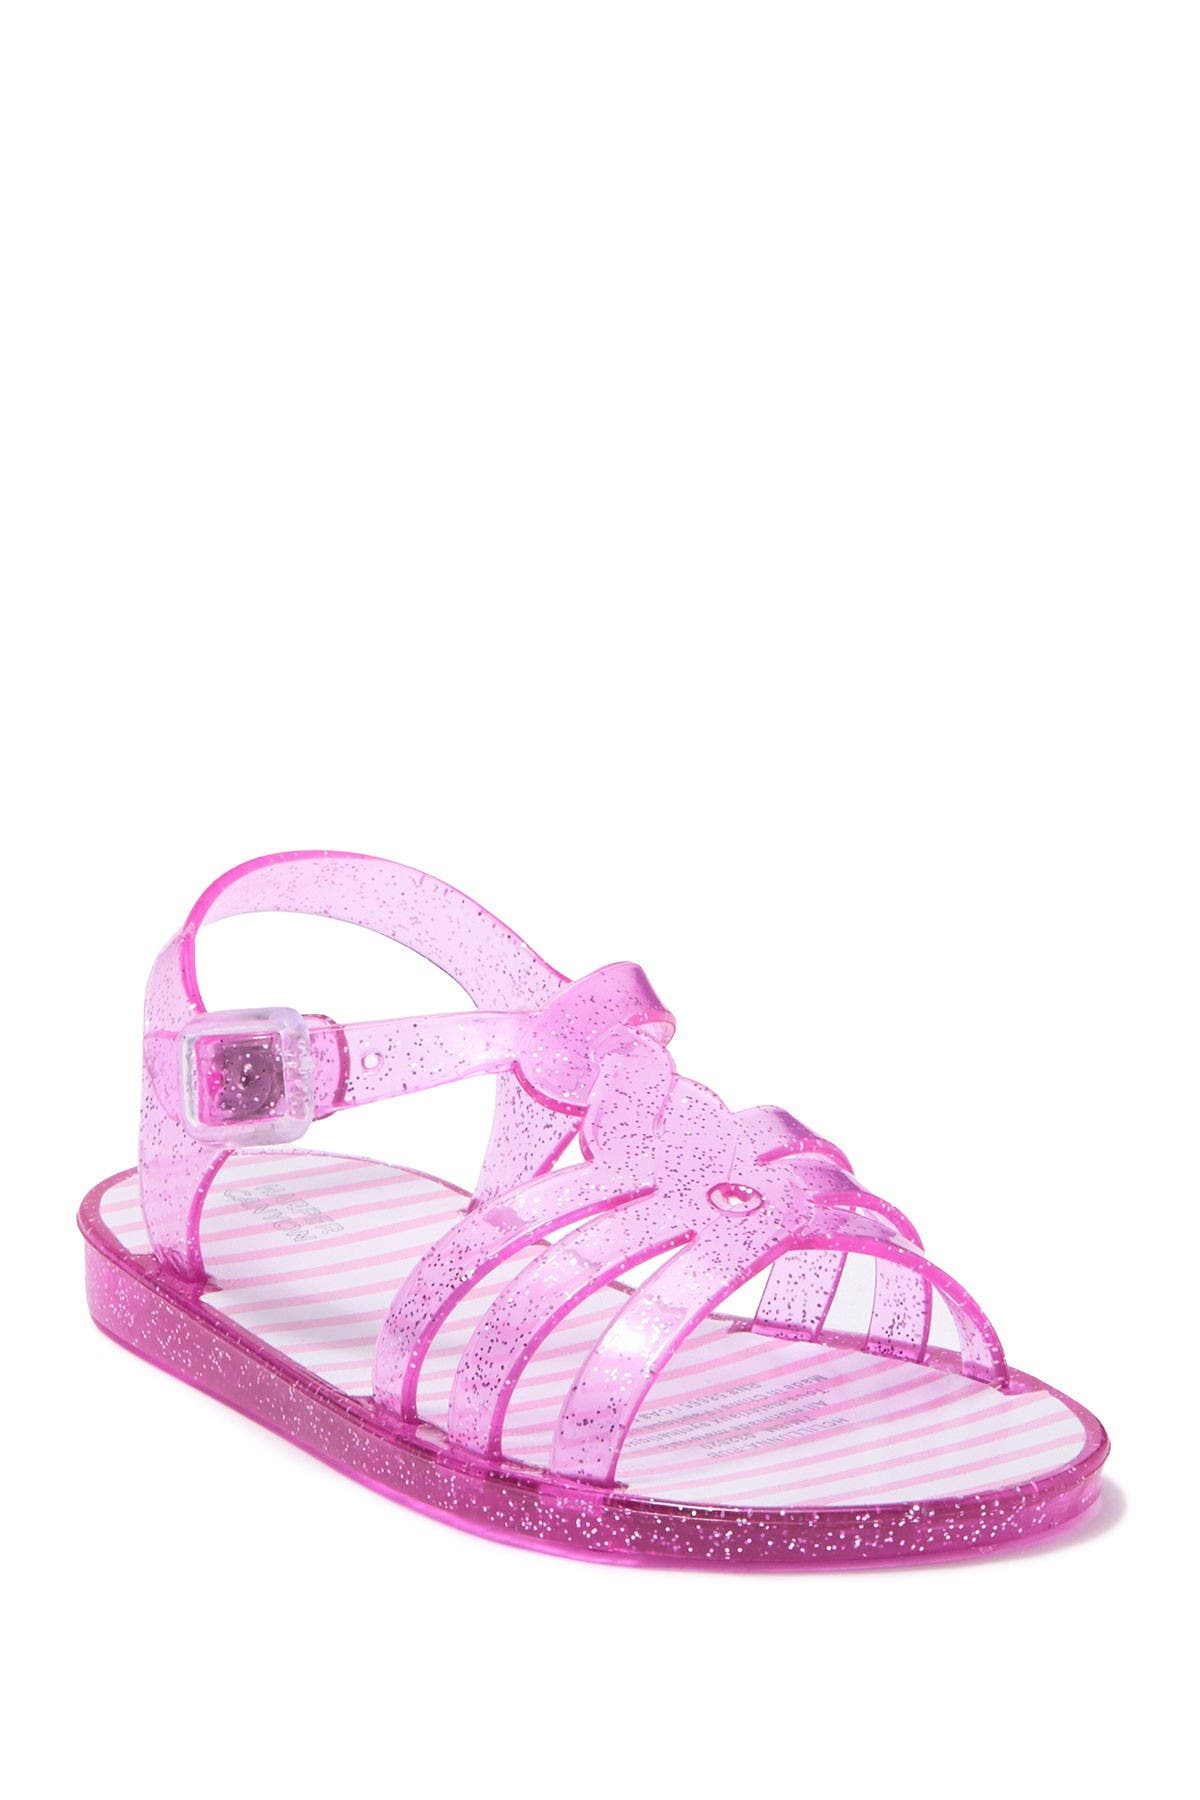 nordstrom jelly sandals